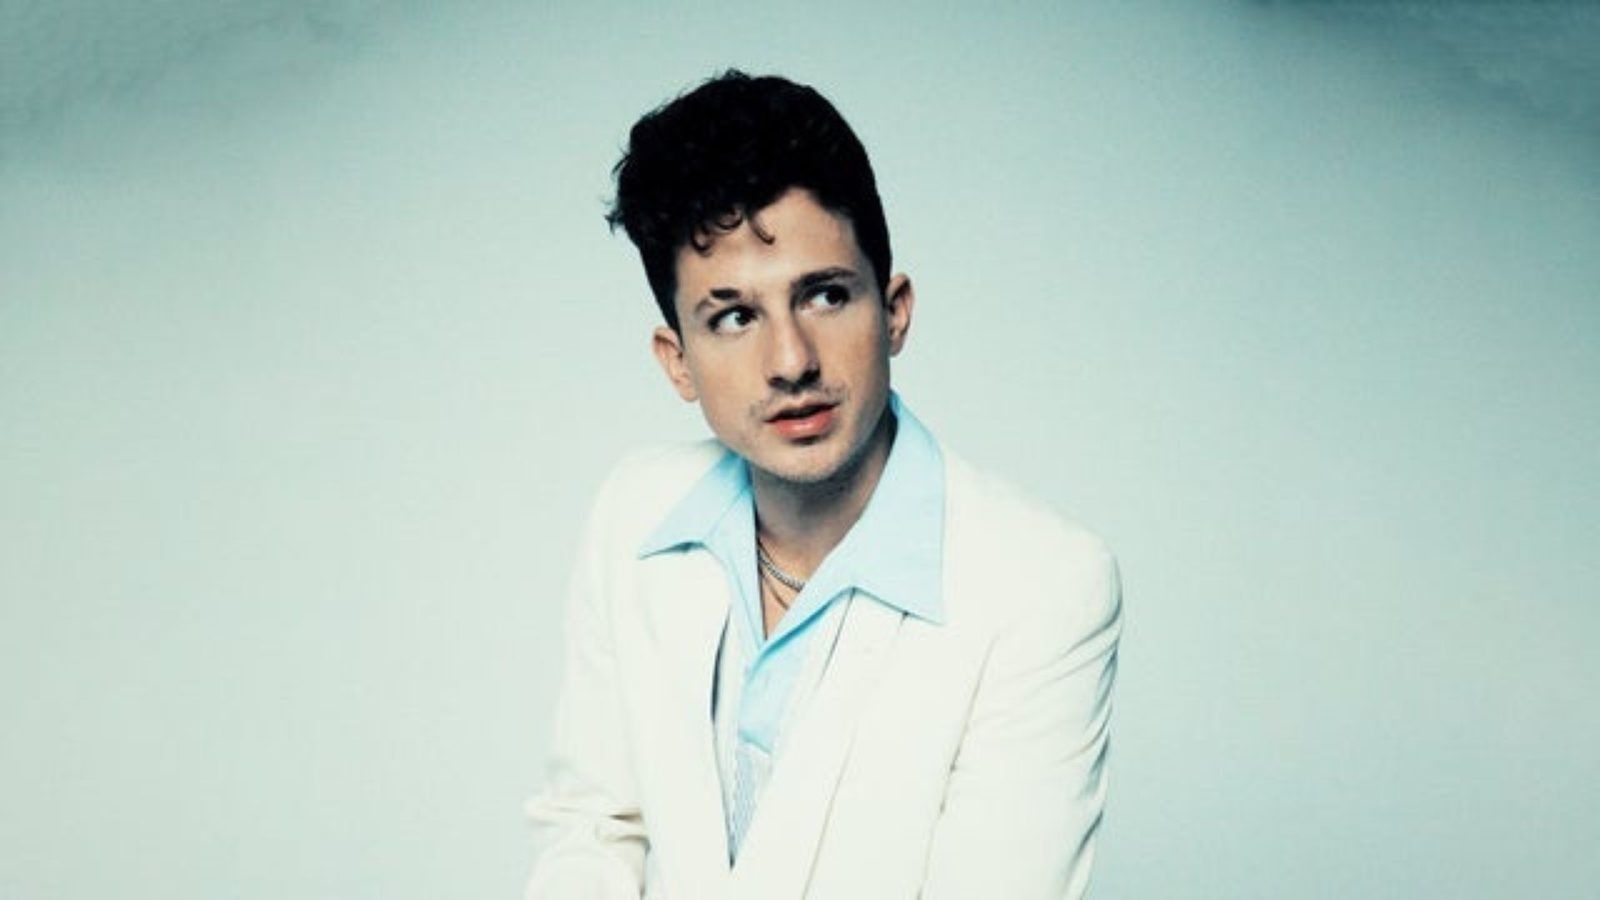 Charlie Puth concert in Hong Kong Everything you need to know